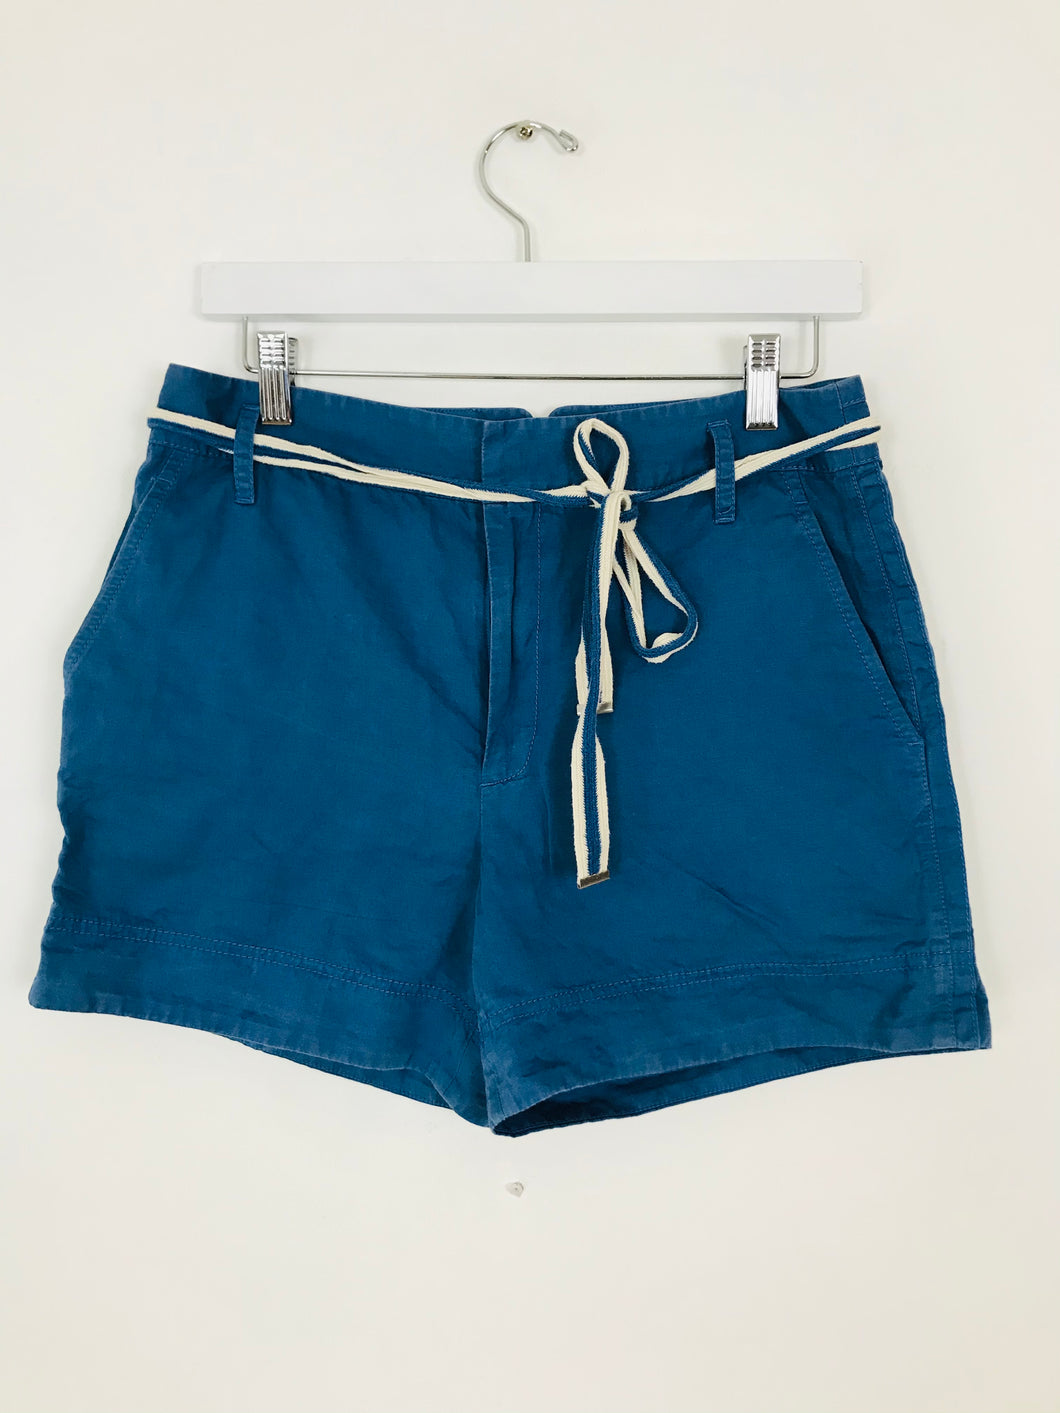 Marc by Marc Jacobs High Waisted Shorts | UK10 W30 L4 | Blue